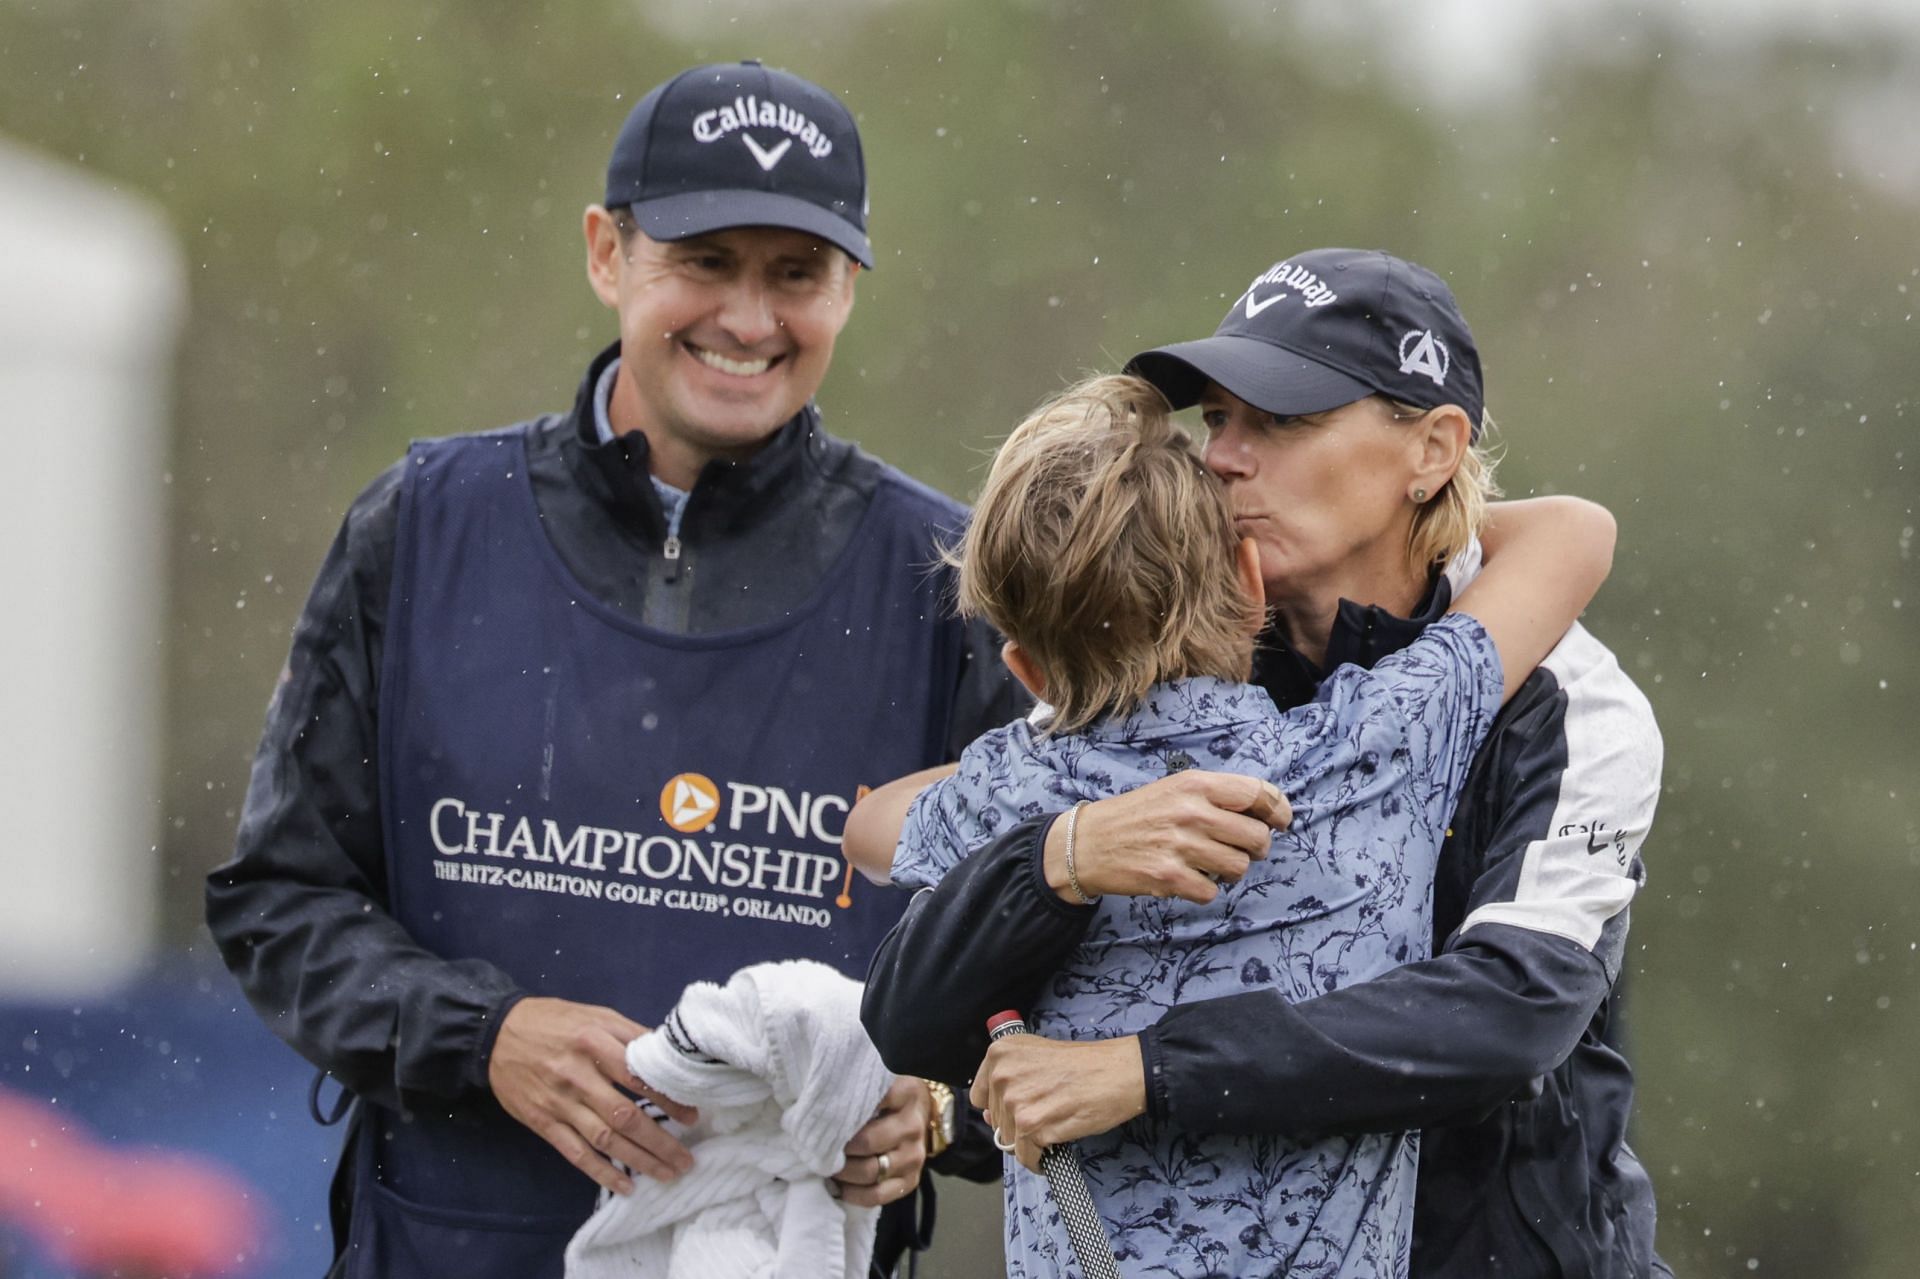 Will McGee hugs his mother, Annika Sorenstam, at the PNC Championship